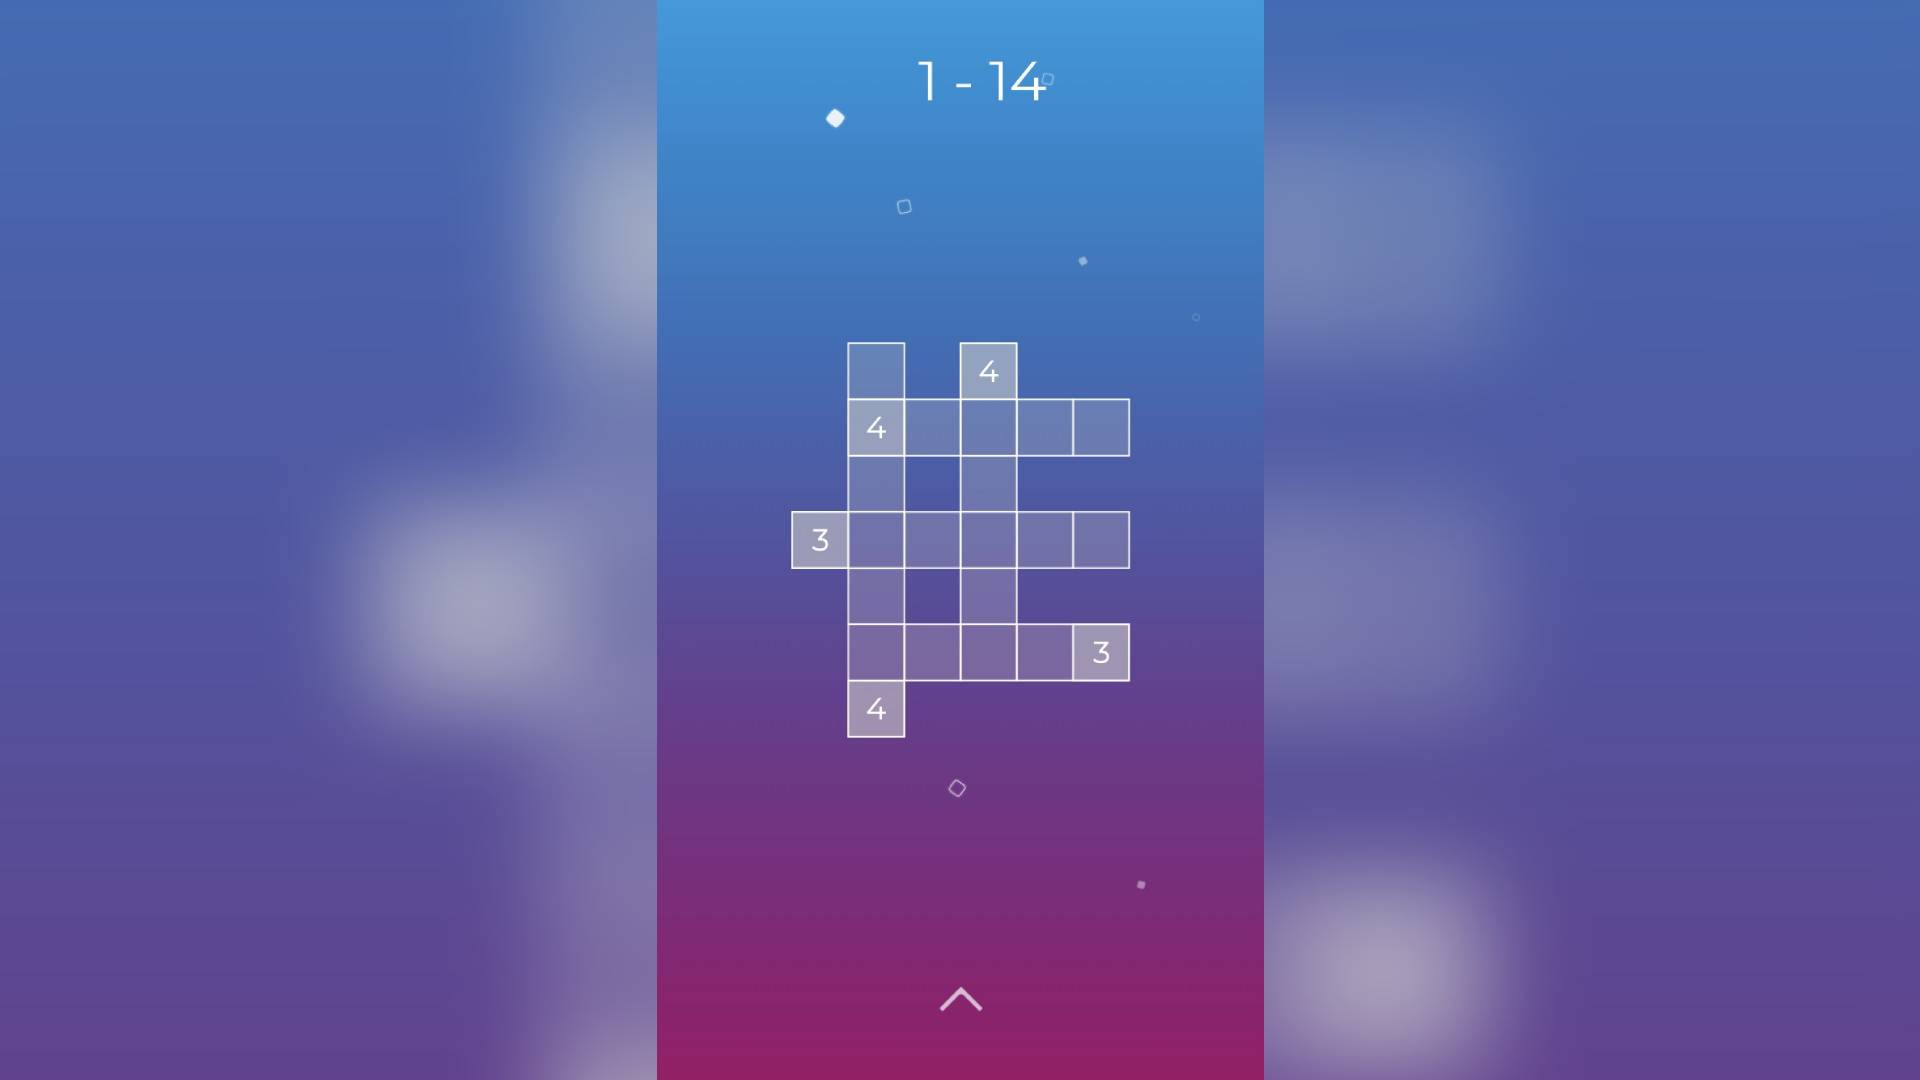 Cool math games: a screenshot from a mobile title shows a game board with different numbers visible, against a blue and purple gradient 